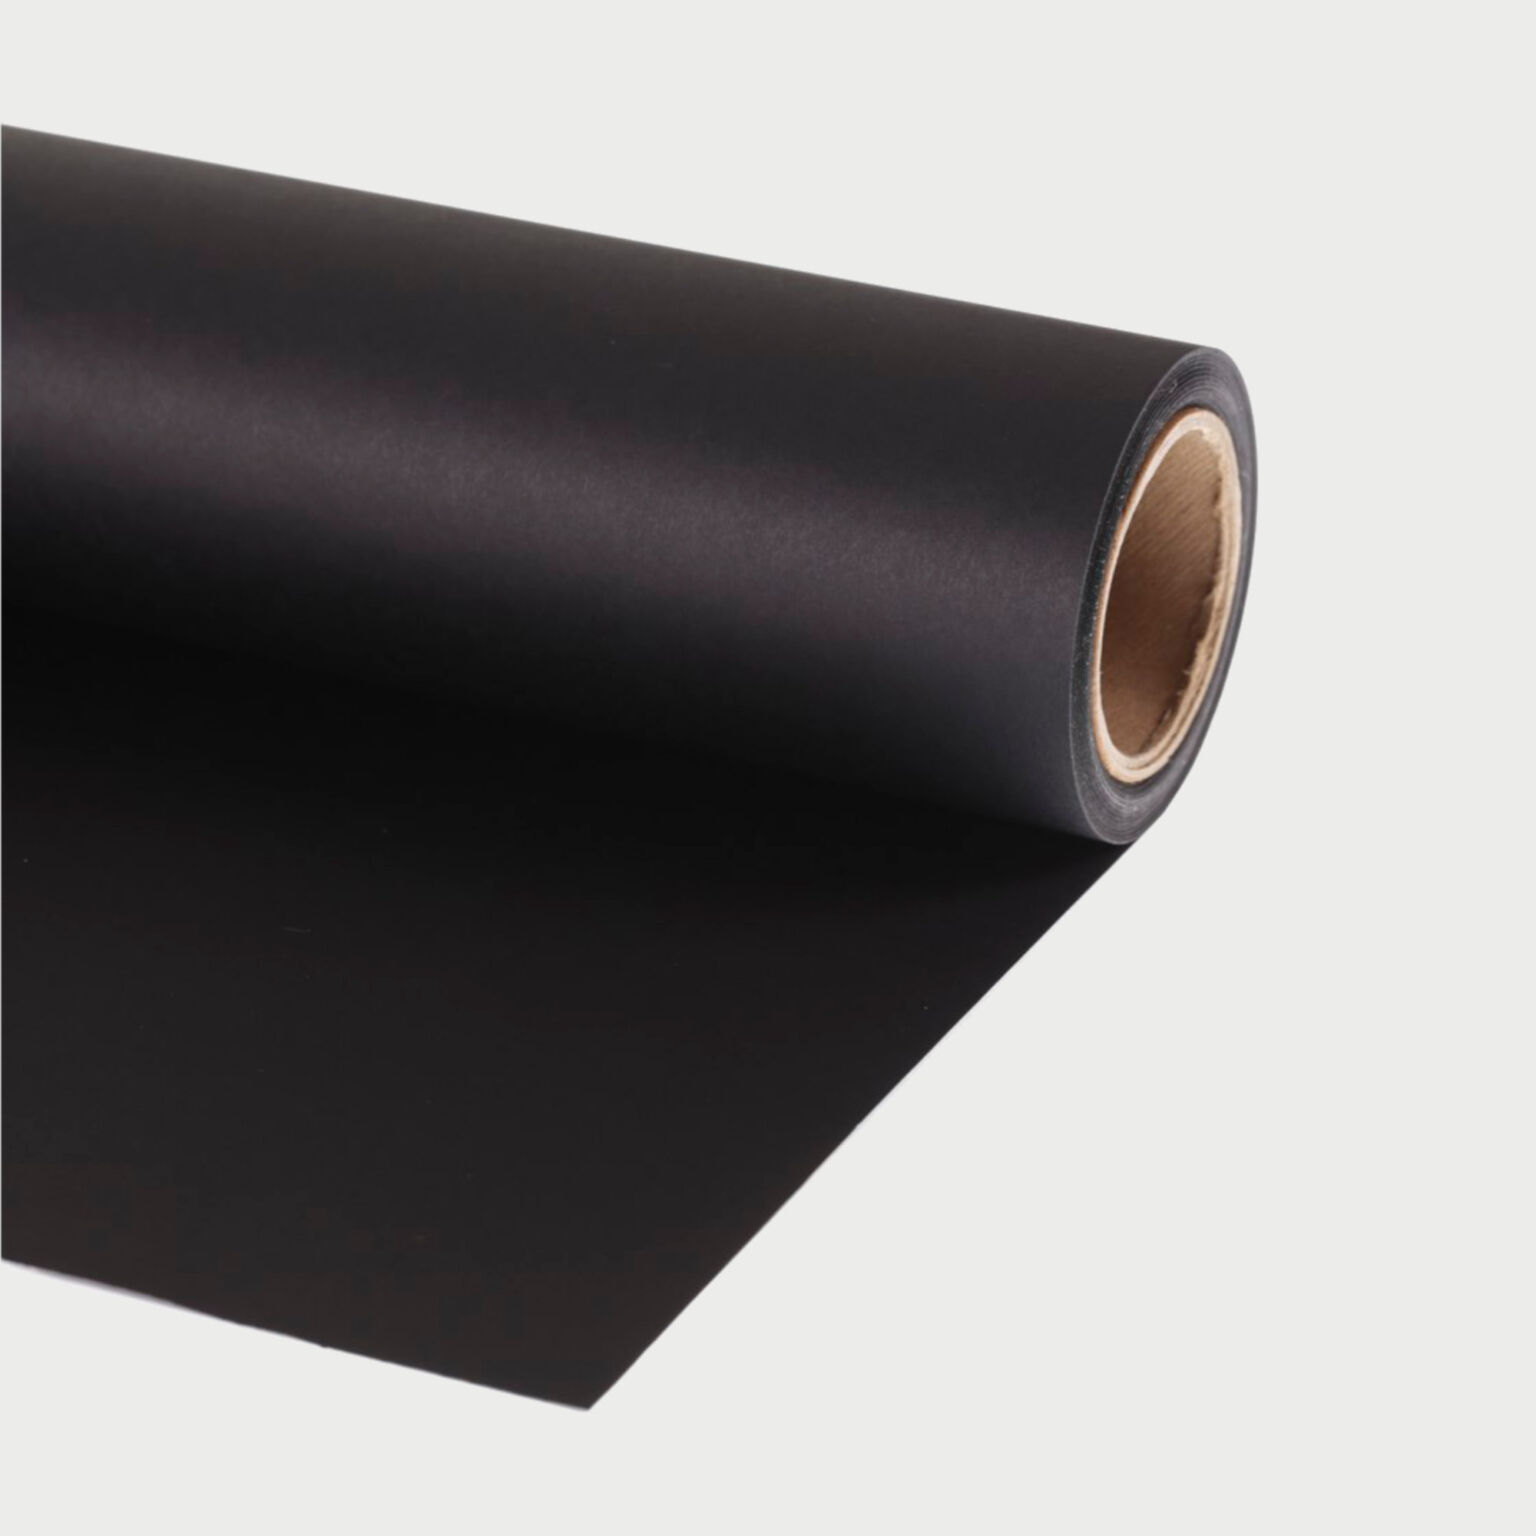 Manfrotto Paper Black Seamless Background Paper 2 72m X 11m